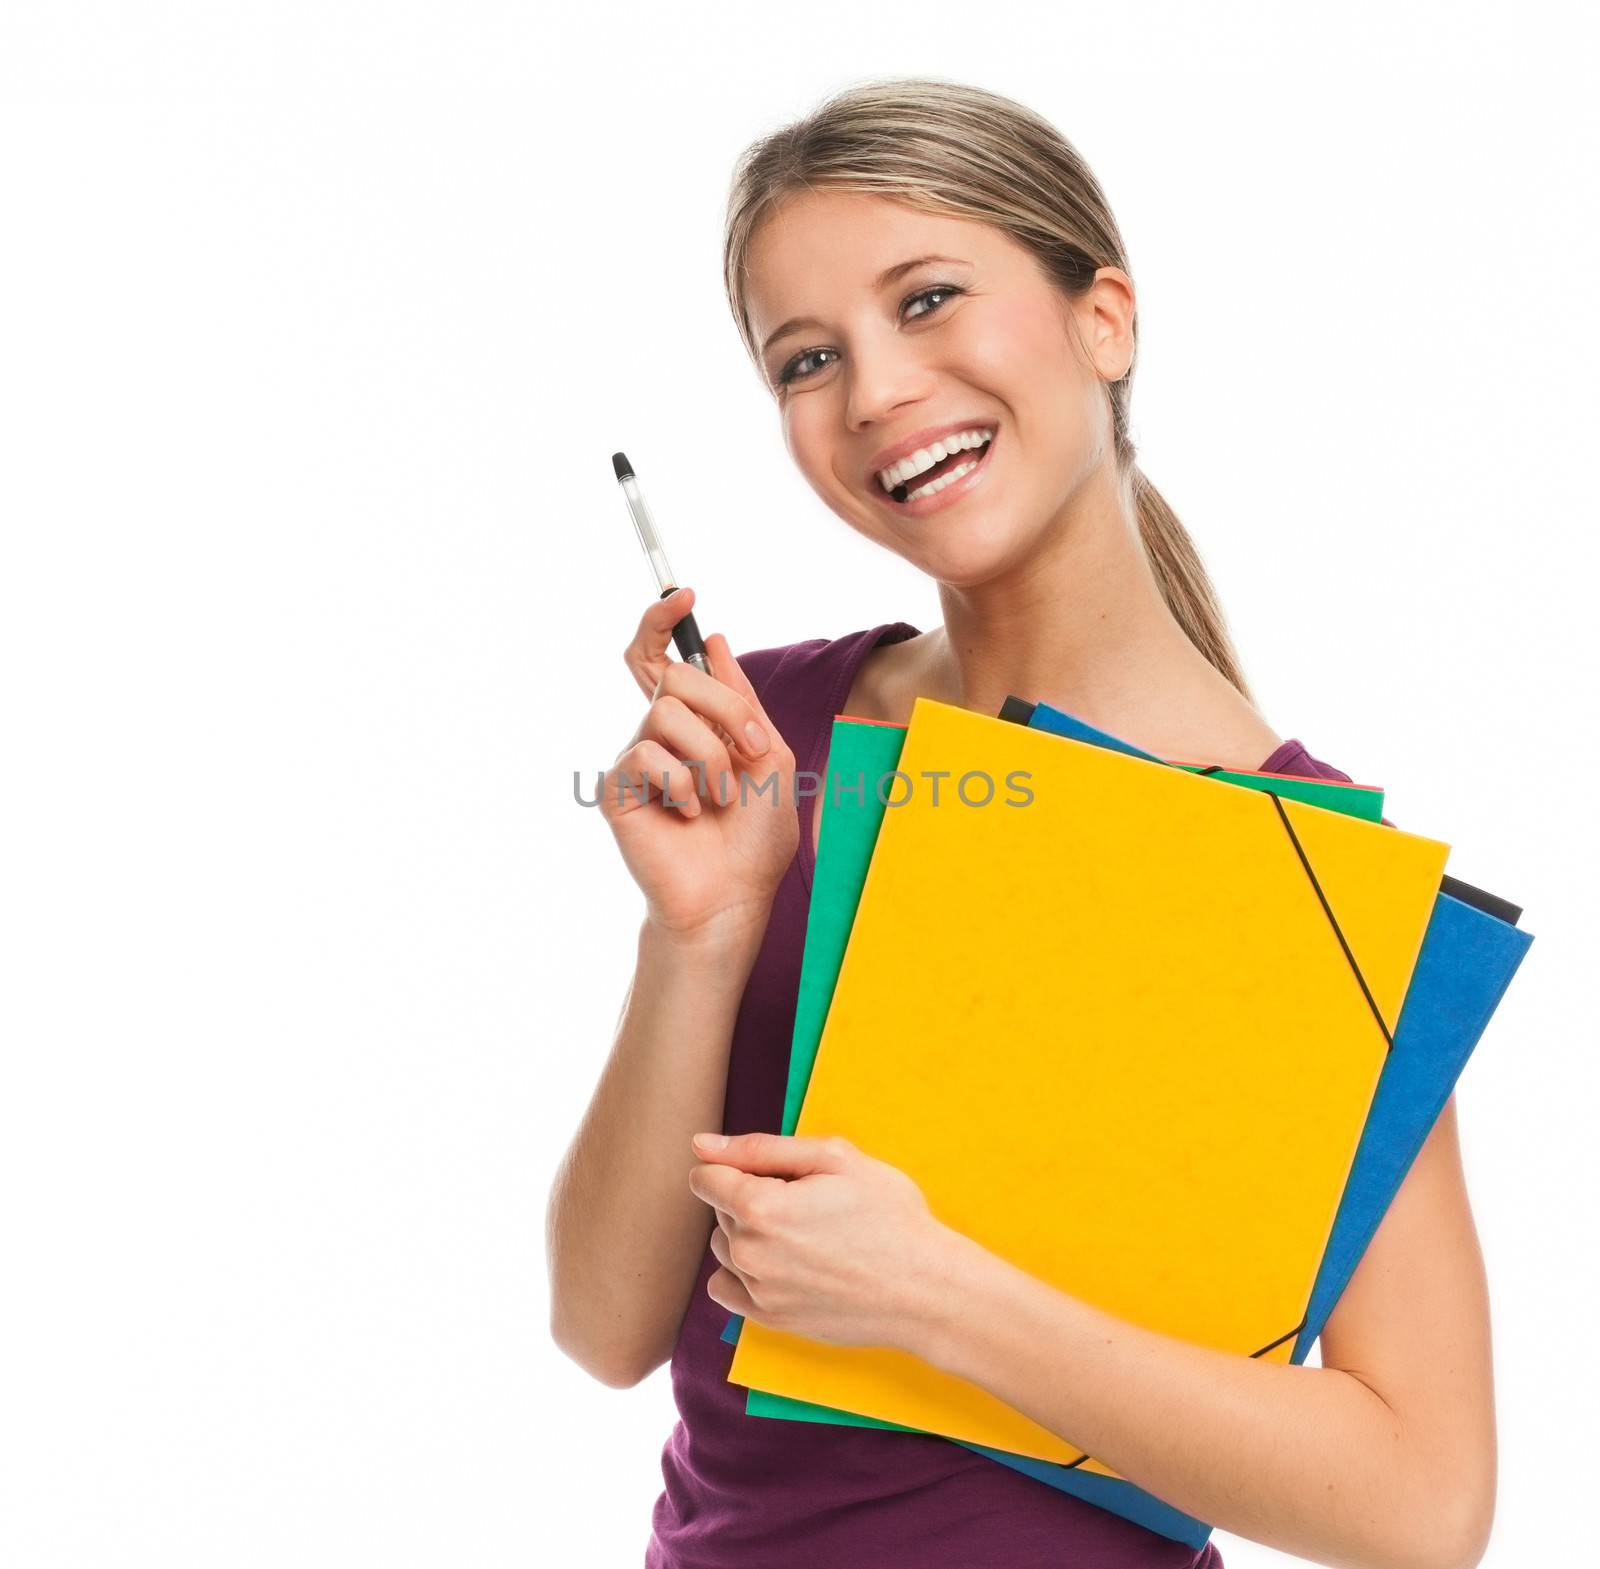 Young student smiling, holding folders and pen, isolated on white